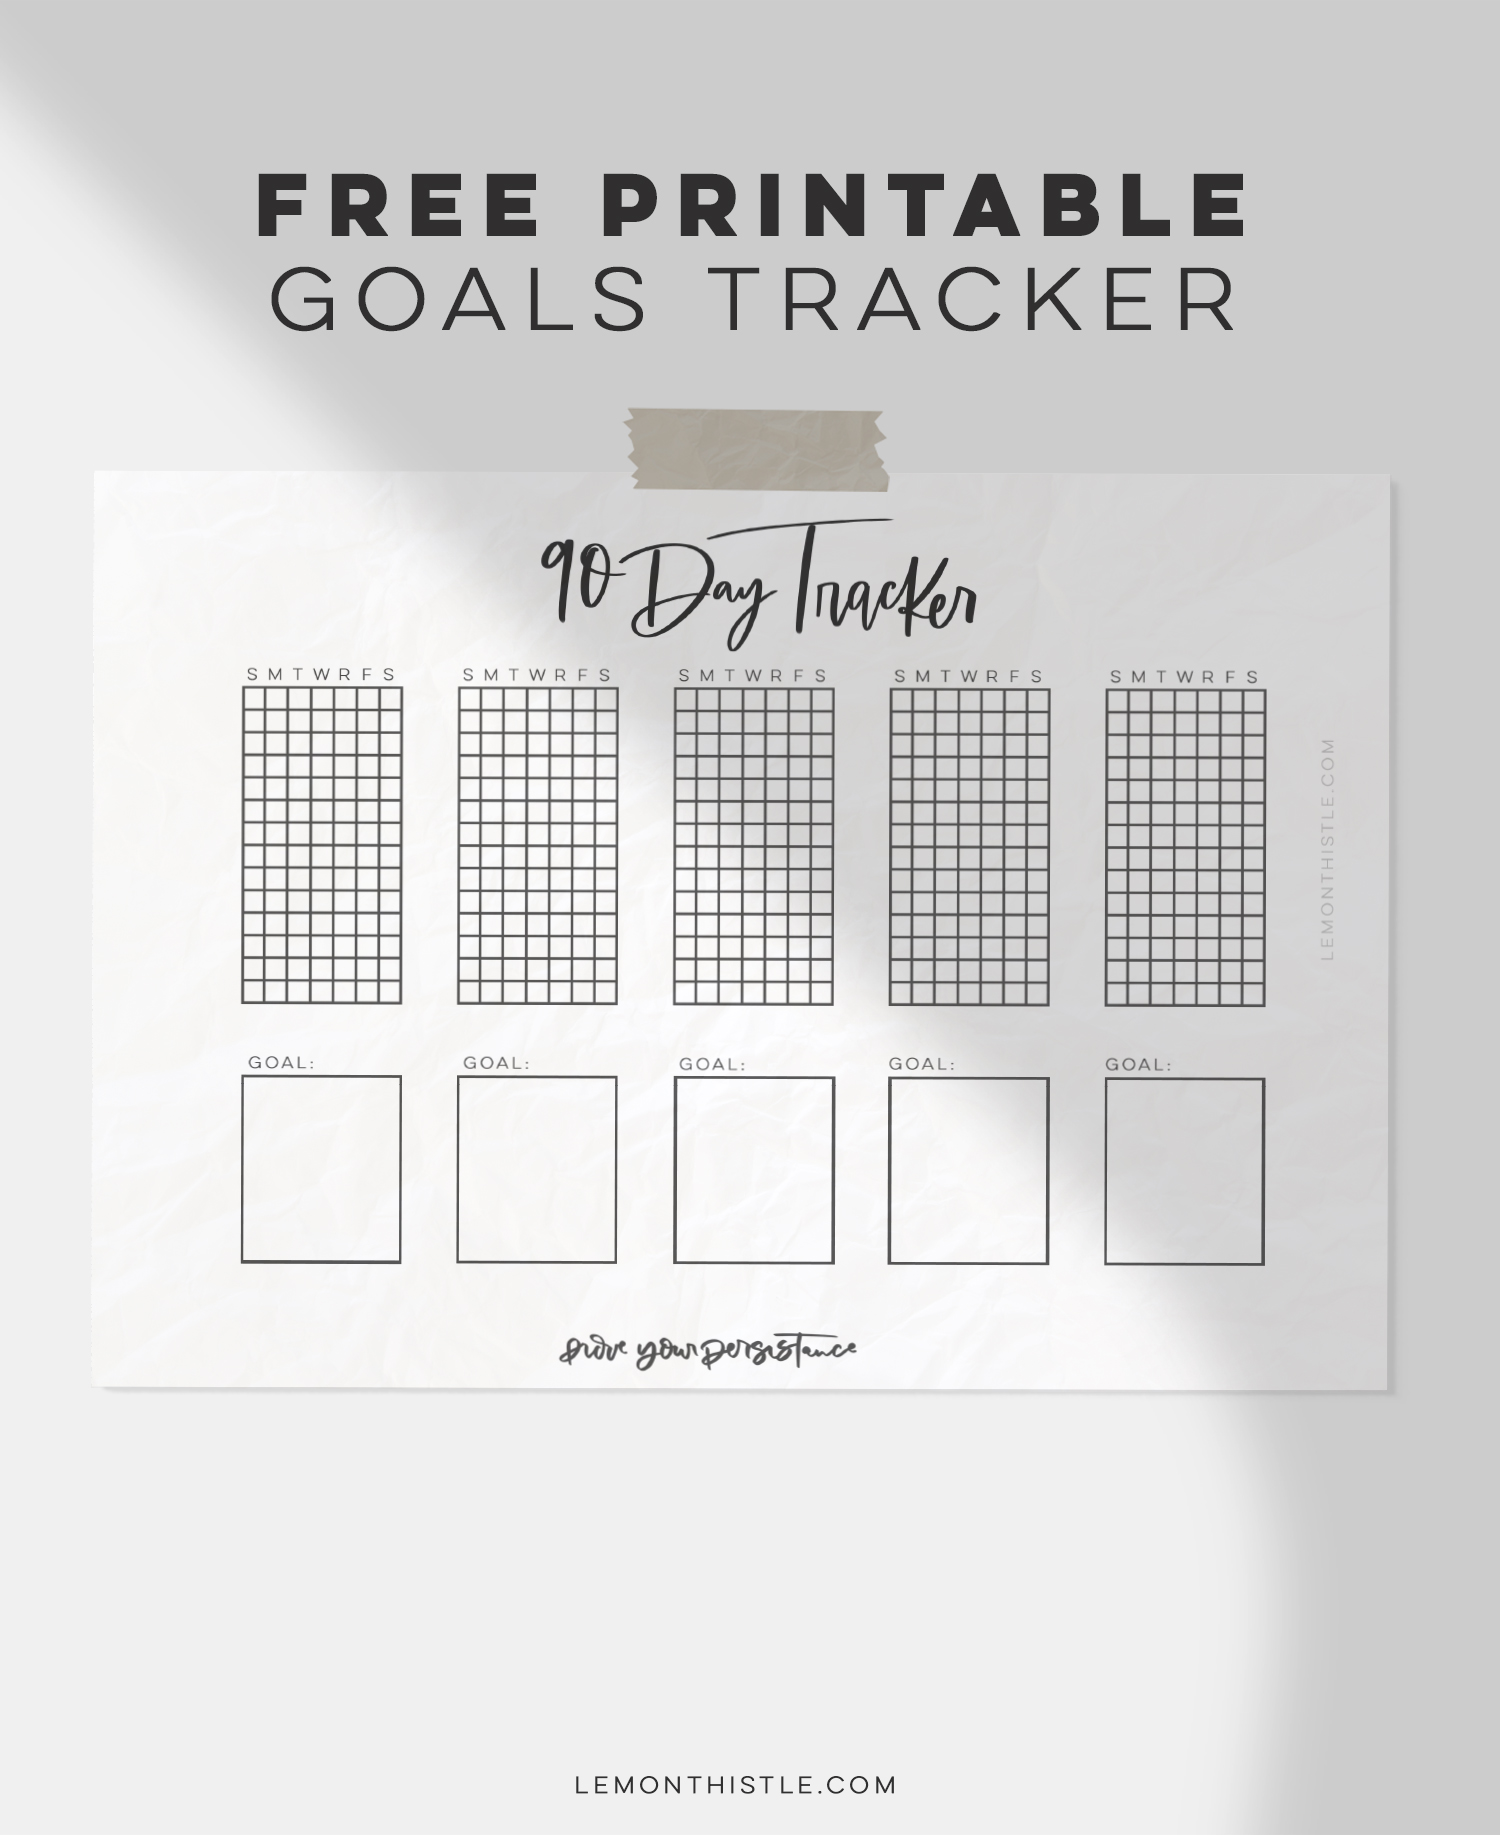 90 day printable habit tracker (free download!)